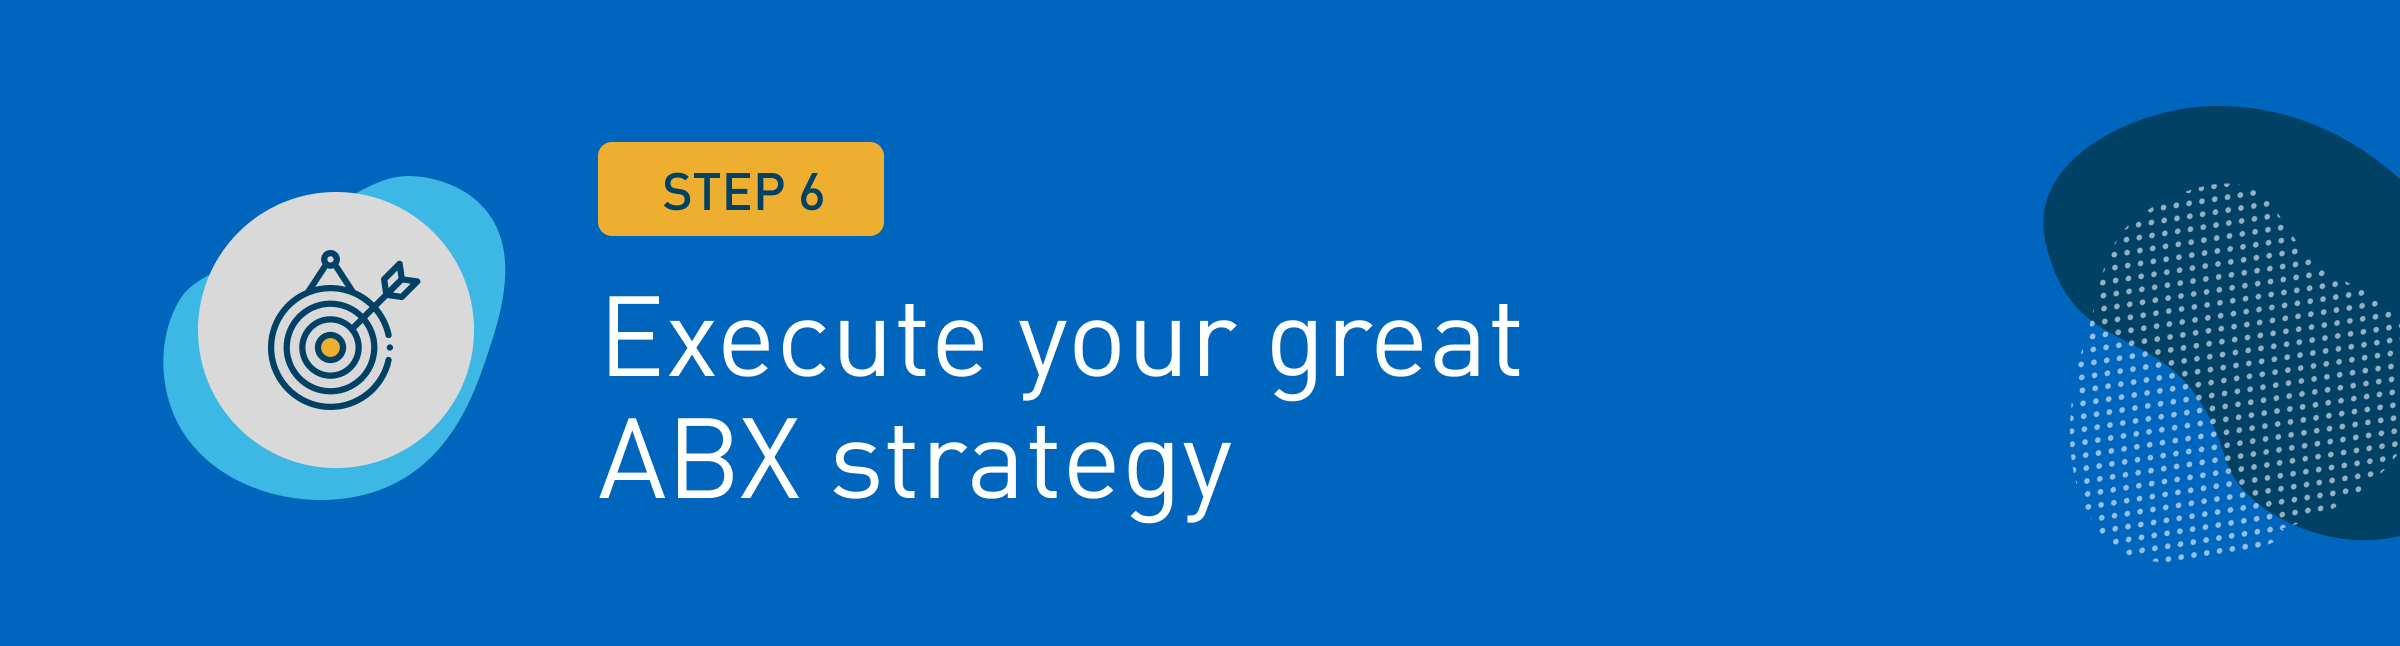 2954: execute your great ABX strategy 